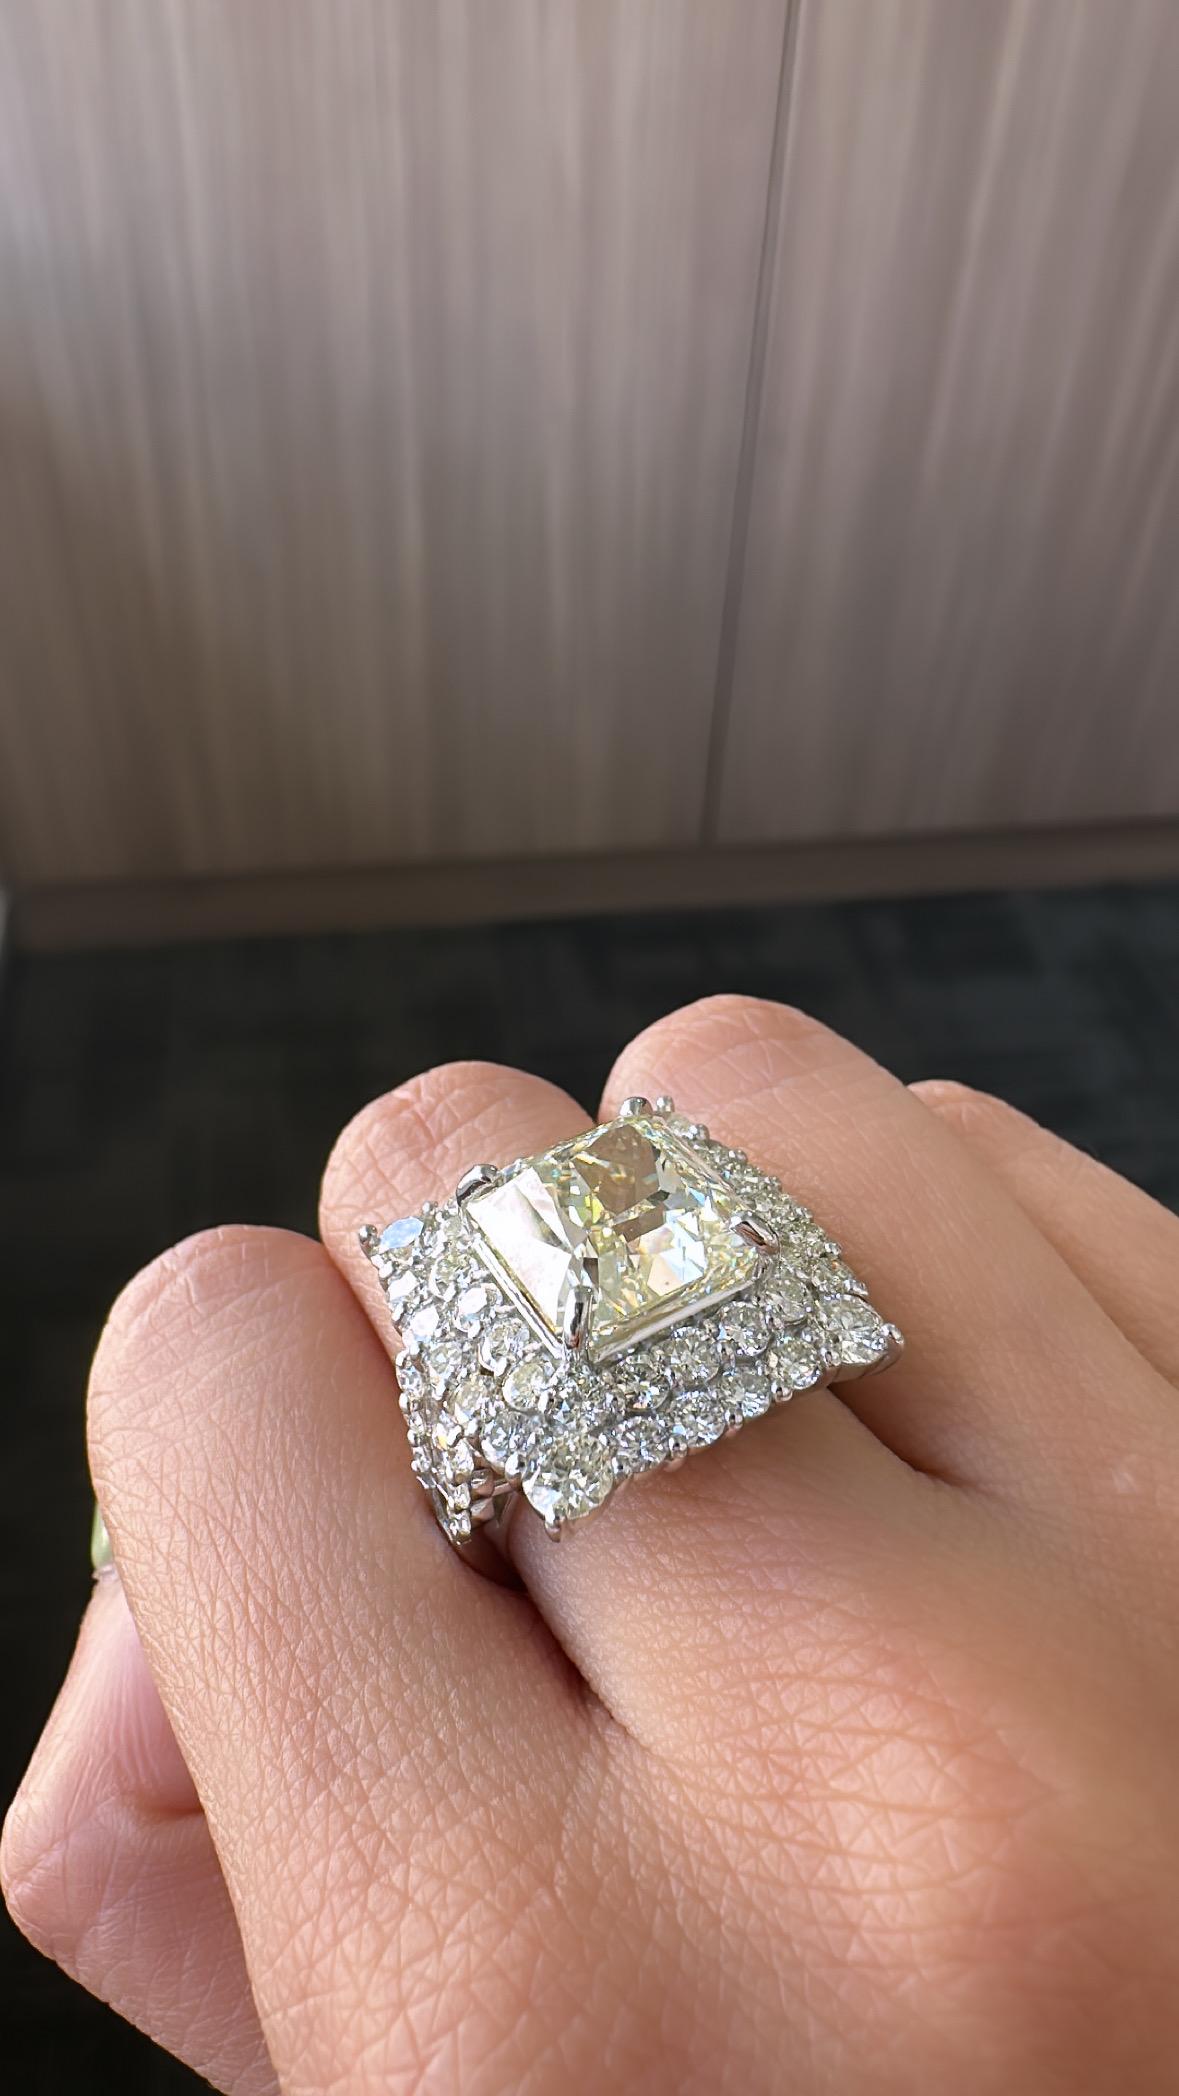 10.03 carats, Very Light Yellow, VS2 clarity, Princess Diamond Engagement Ring For Sale 7